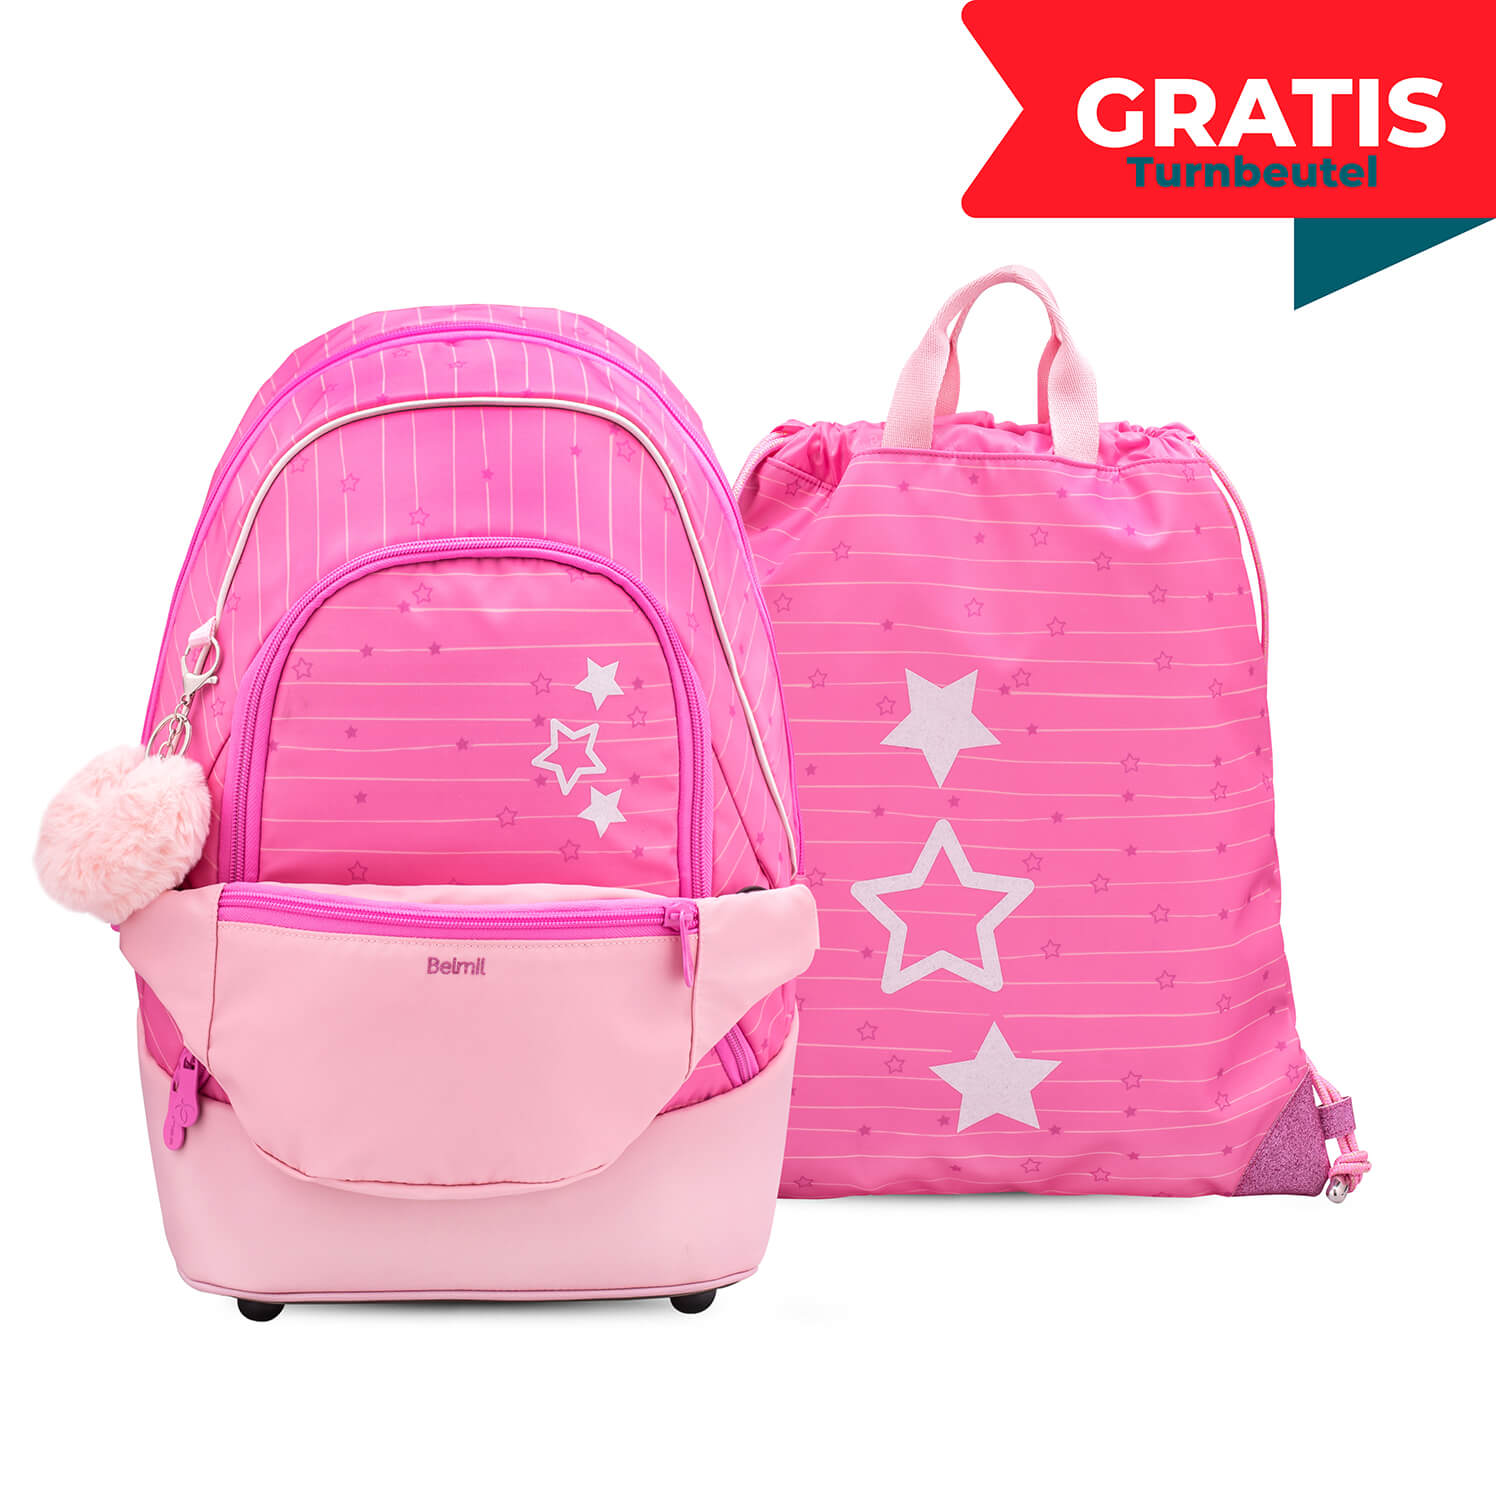 Premium Backpack & Fanny Pack Candy Schoolbag 2pcs. with GRATIS Gymbag